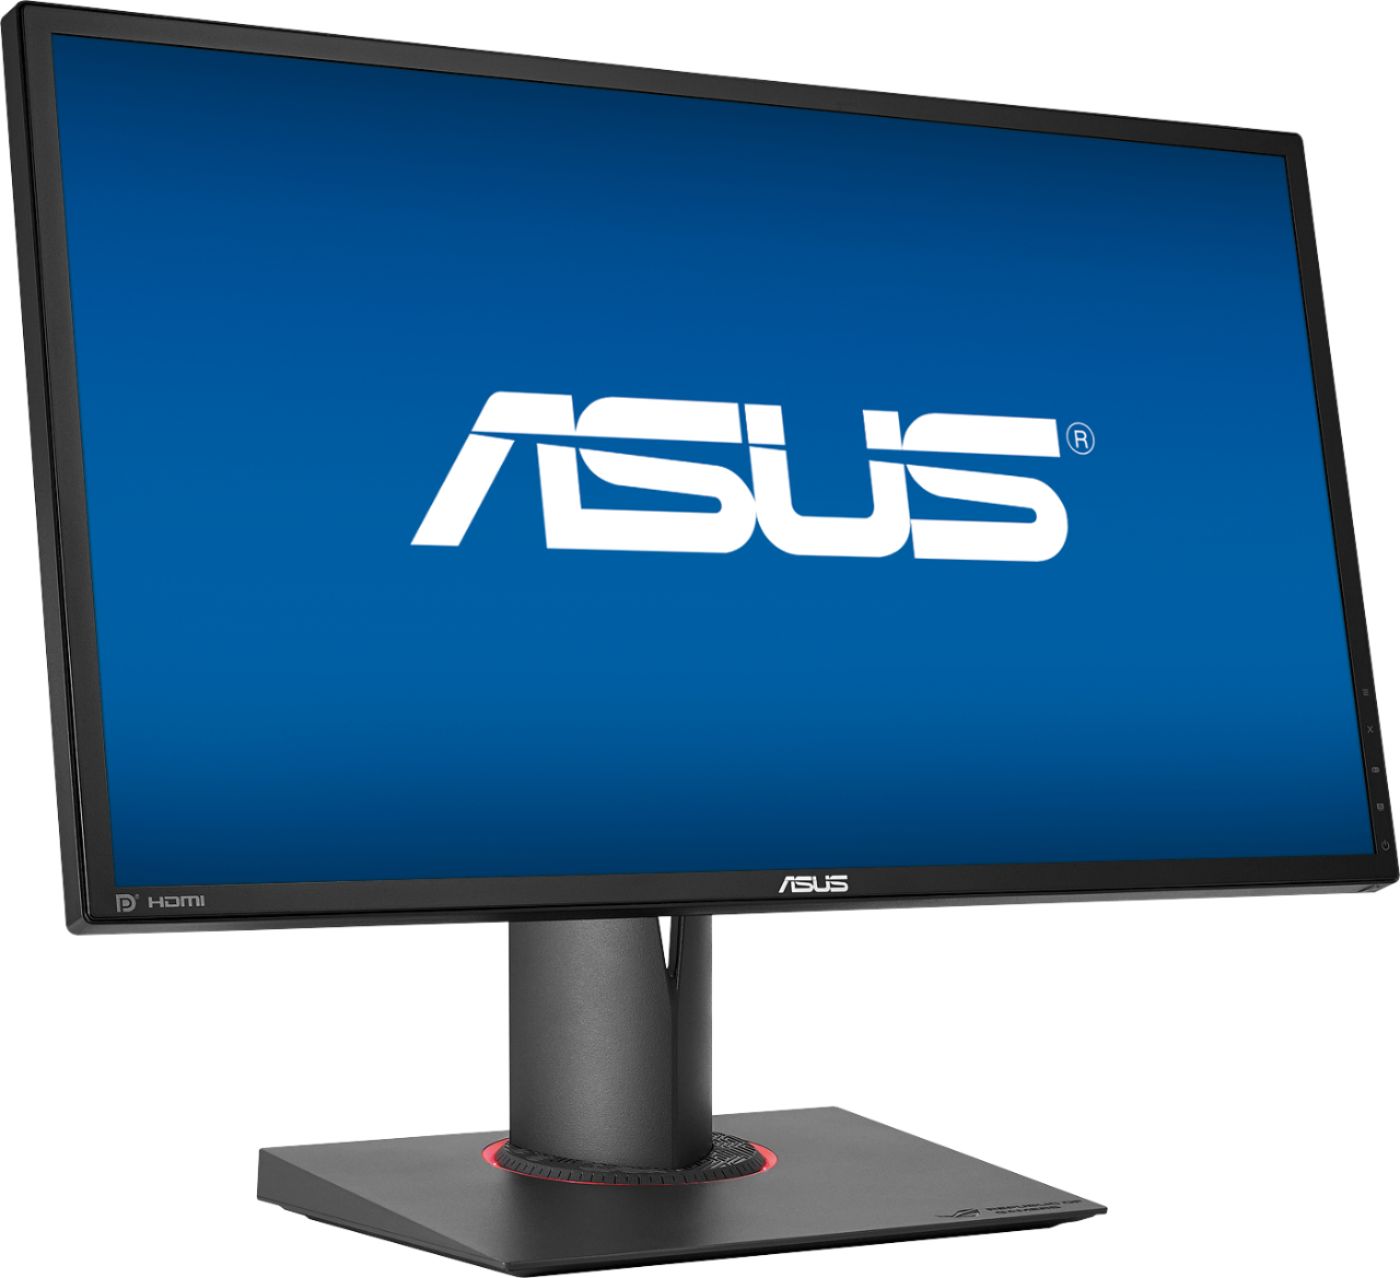 Angle View: ASUS - Geek Squad Certified Refurbished ROG Swift 24" LCD FHD G-SYNC Monitor - Black